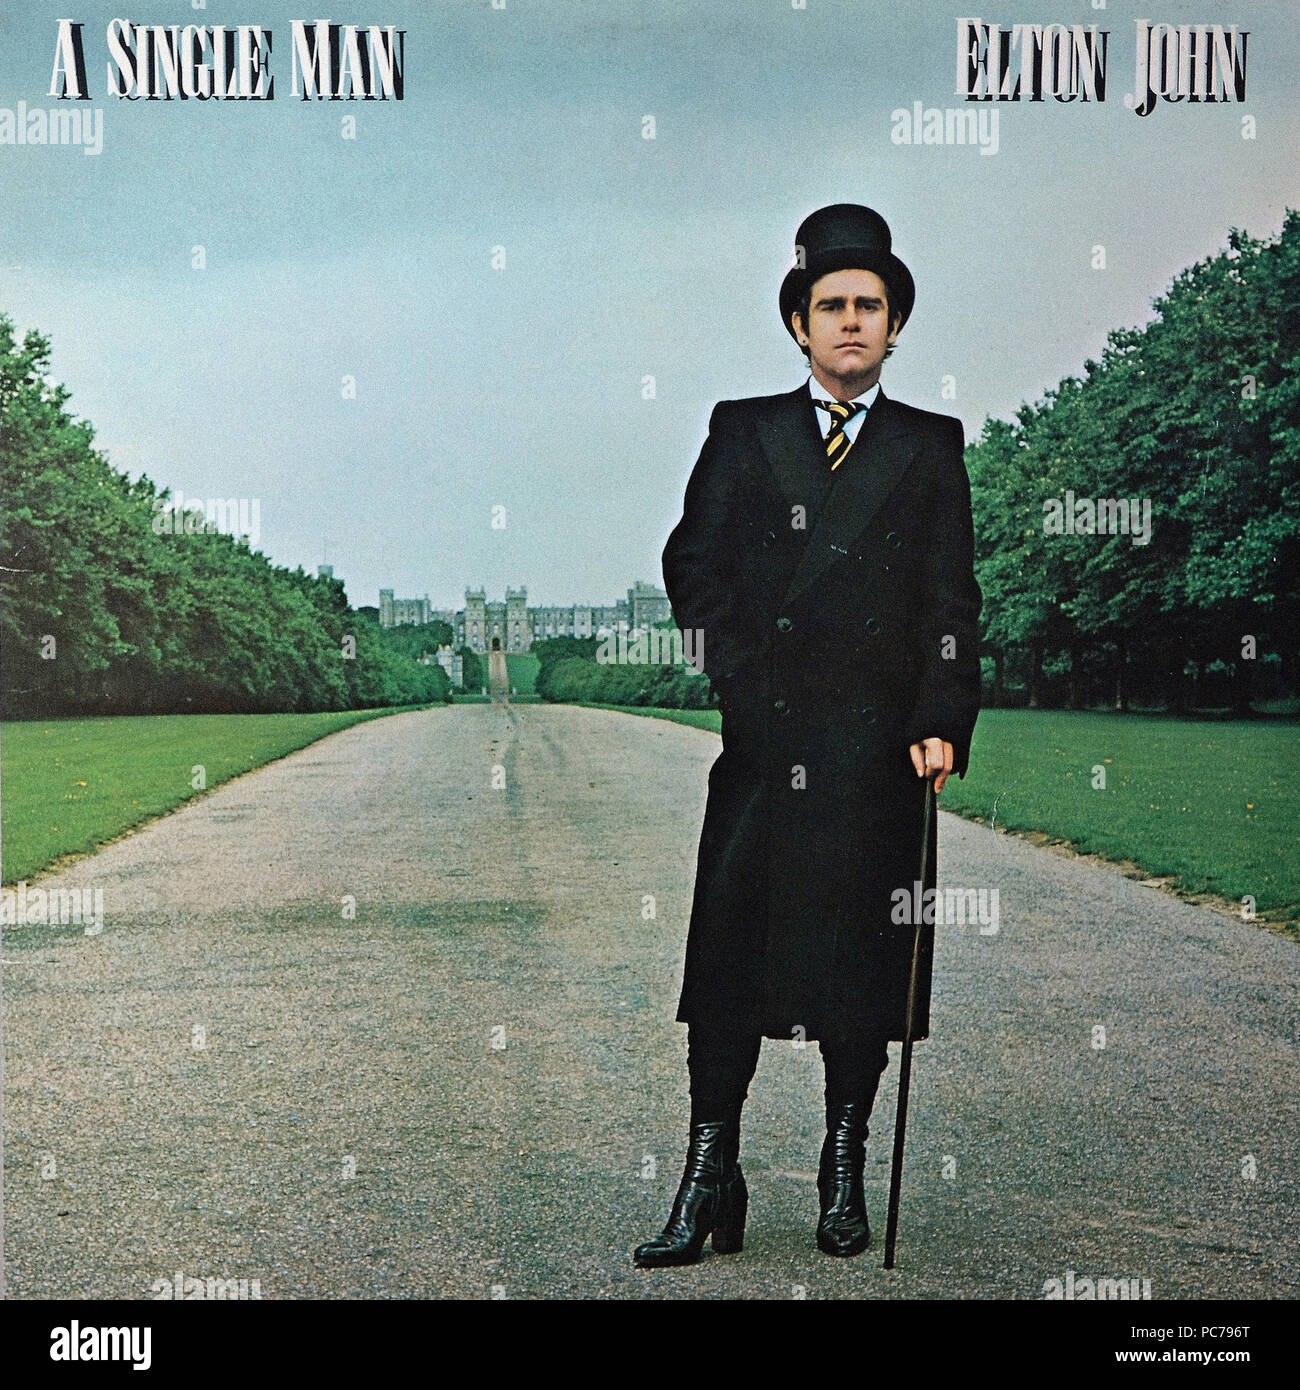 Elton john album cover hi-res stock photography and images - Alamy